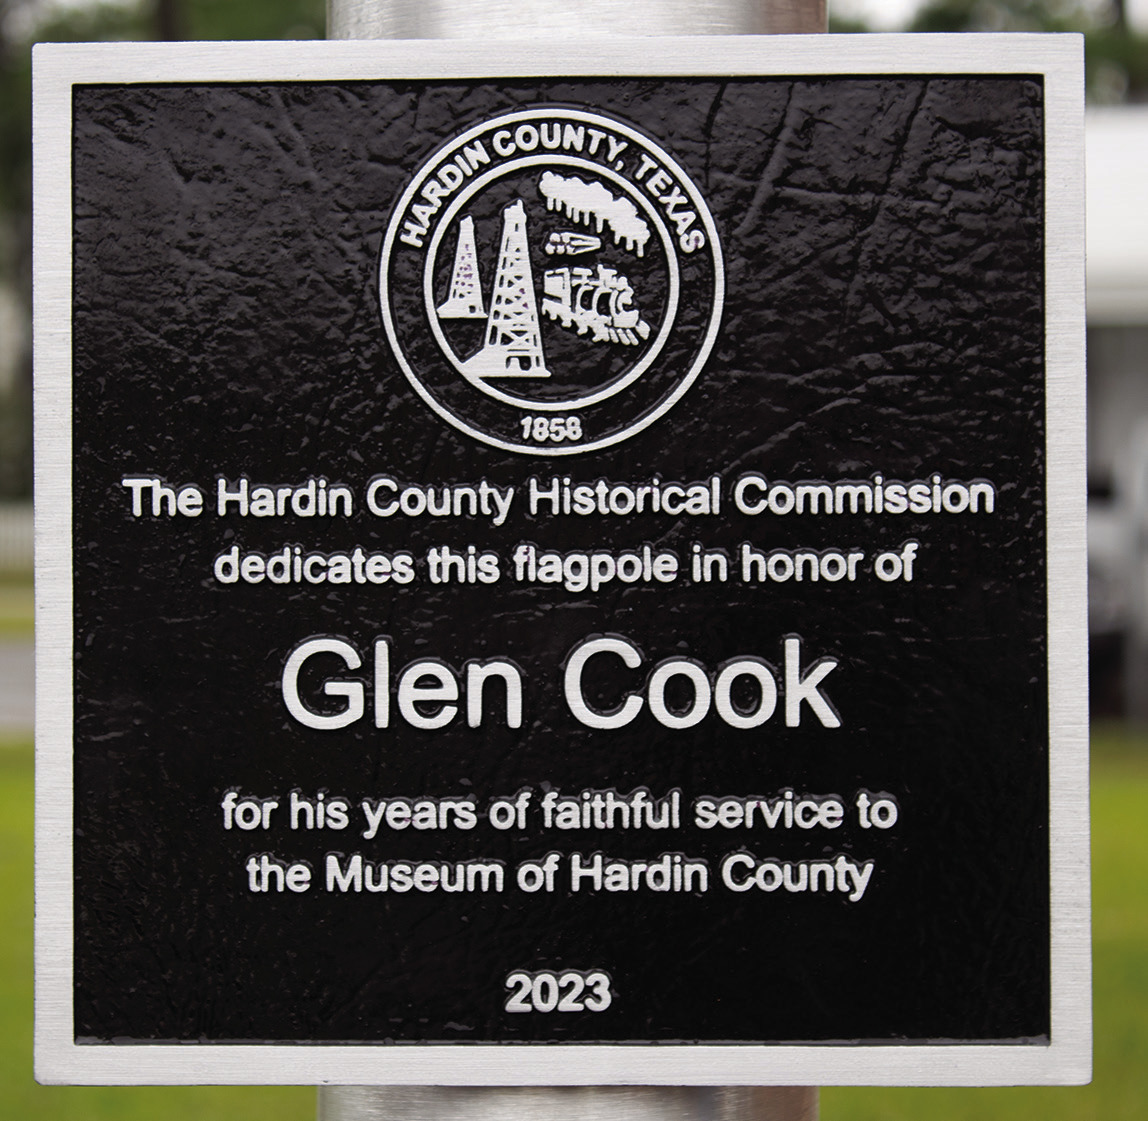 New flagpole at county museum is dedicated to honor Glen Cook